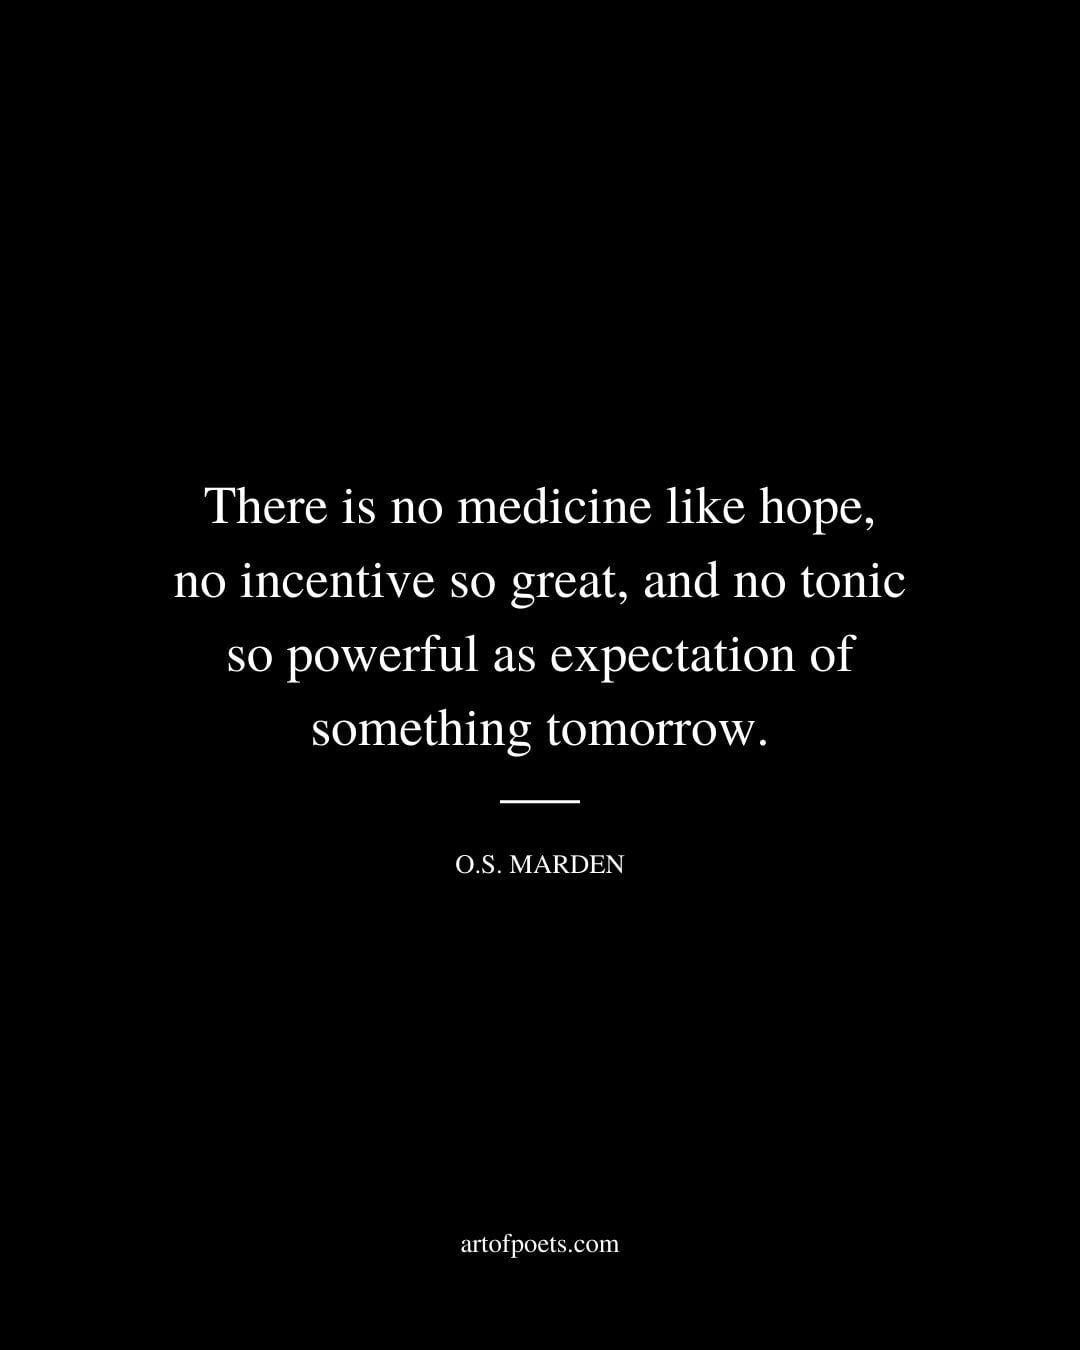 There is no medicine like hope no incentive so great and no tonic so powerful as expectation of something tomorrow. O.S. Marden